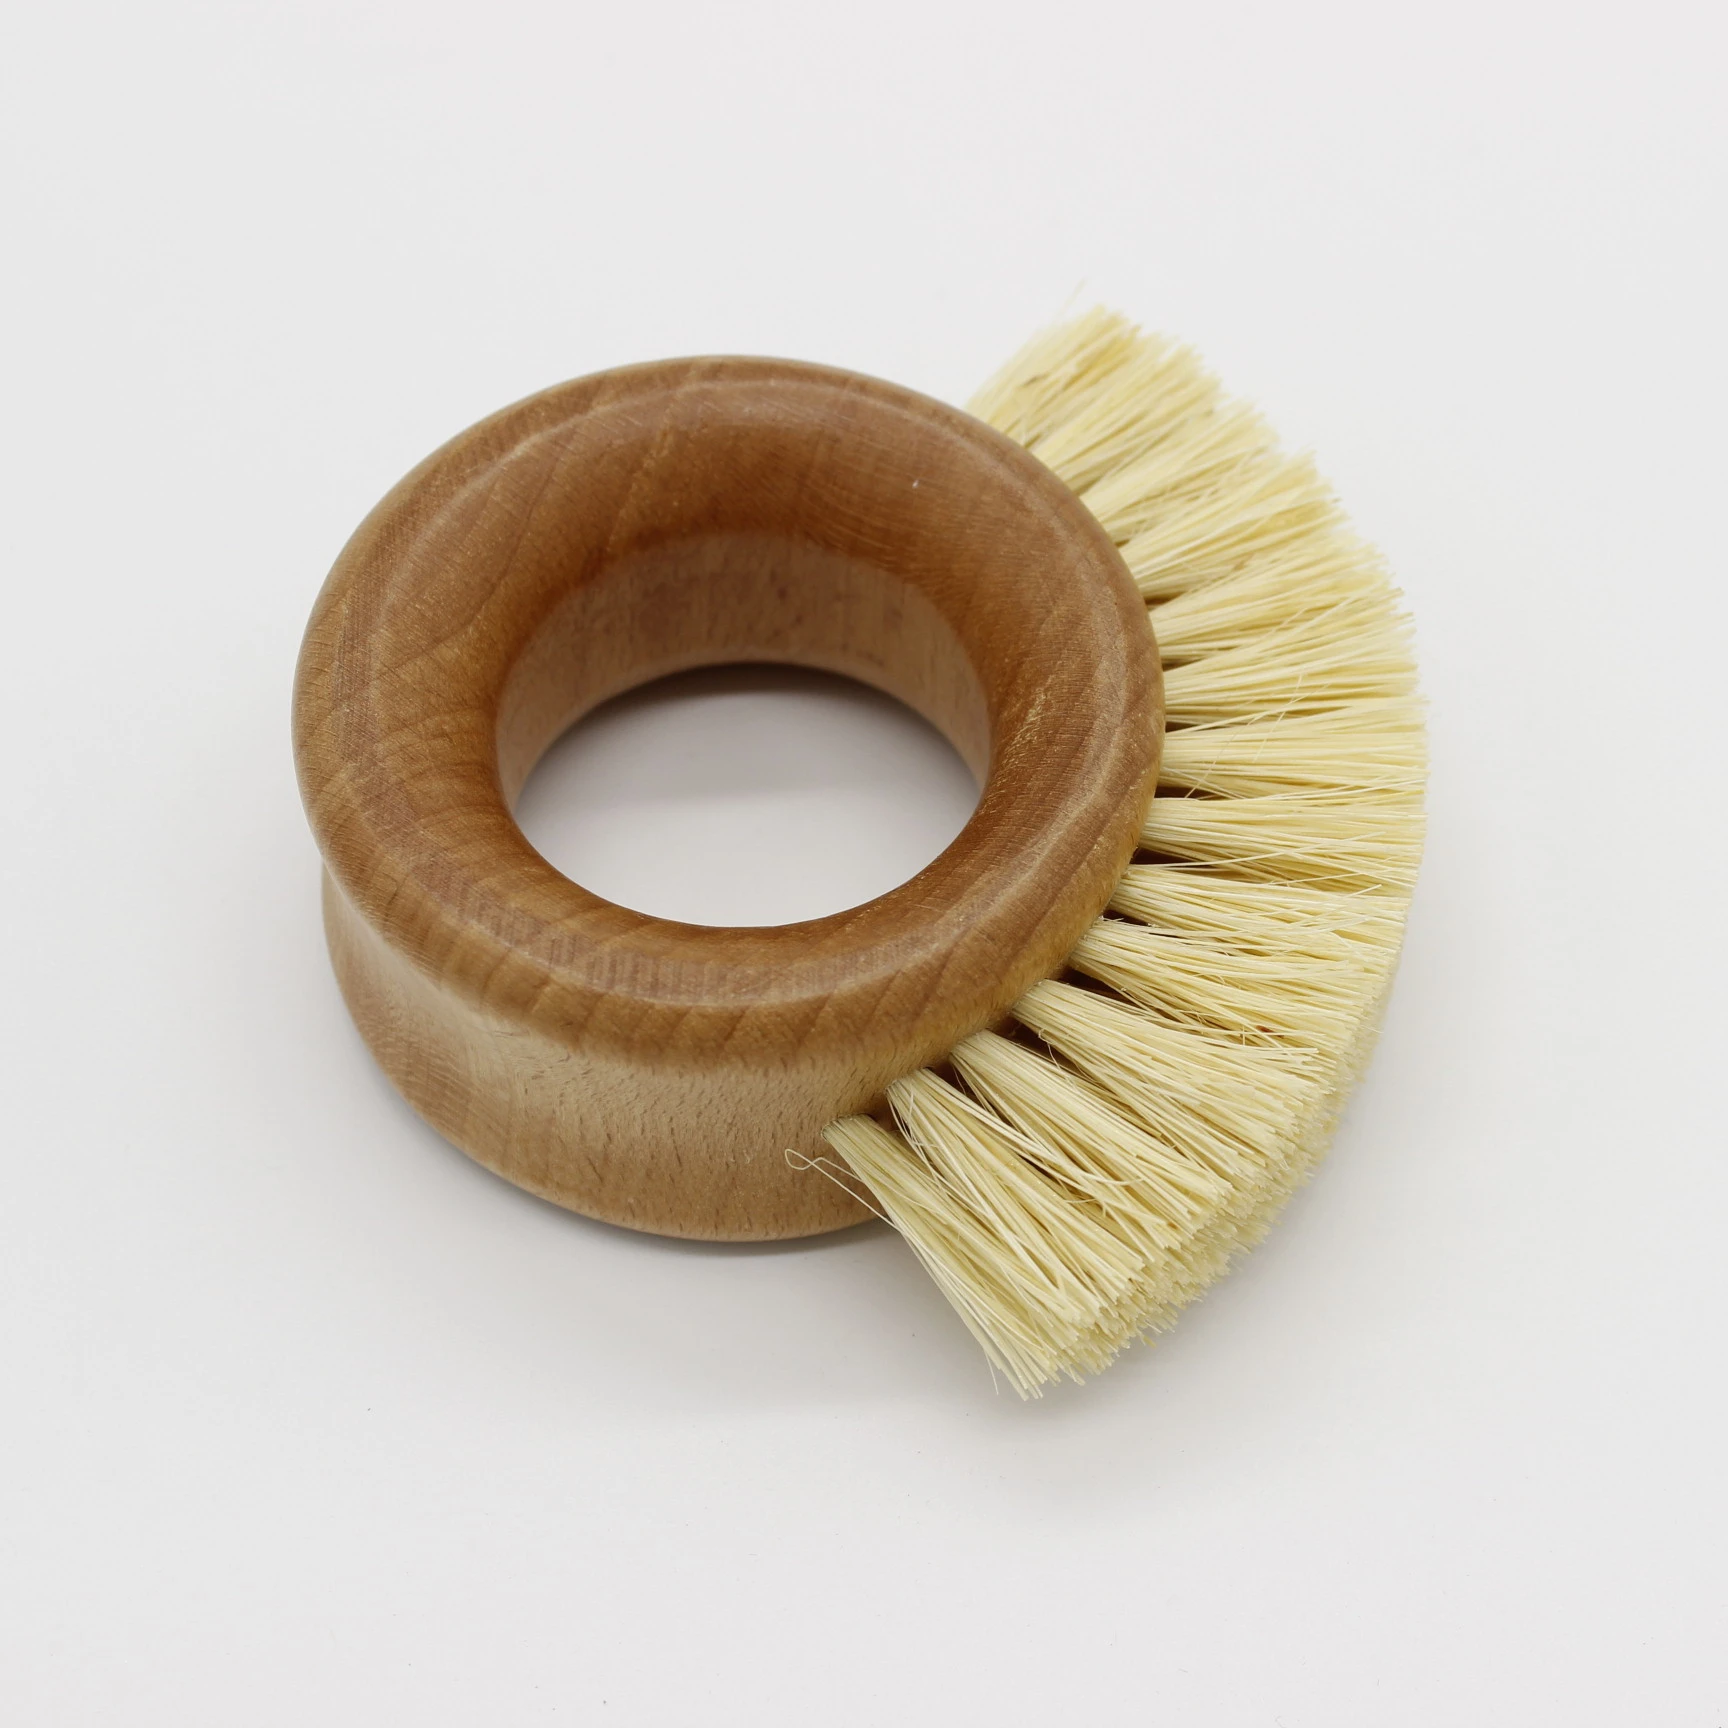 Natural Brushes Set Wood and Bamboo Handle Scraper Scrub Sisal Brush for Pans Pots Kitchen Sink Cleaning  Eco Friendly